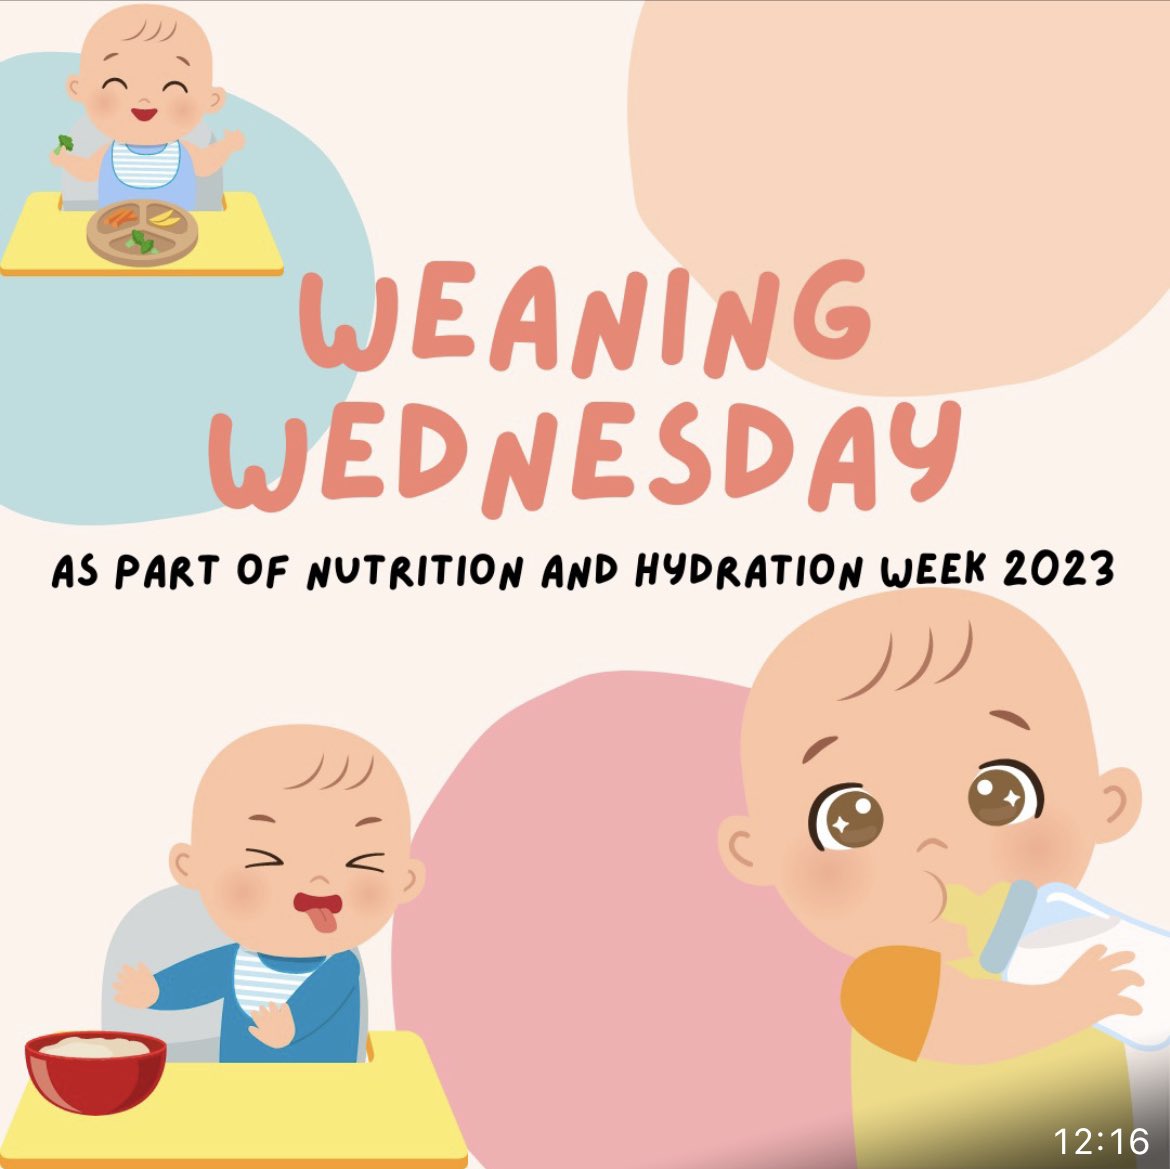 day 3It's #weaningwednesday for @nhweek! Weaning can be an anxious time so please seek support if you have concerns. Solid foods provide the nutrition needed for growth as well as developing the muscles needed for speech. #nhweek #nhweek23 #rd2b @bda_paediatrics @1stepsnutrition